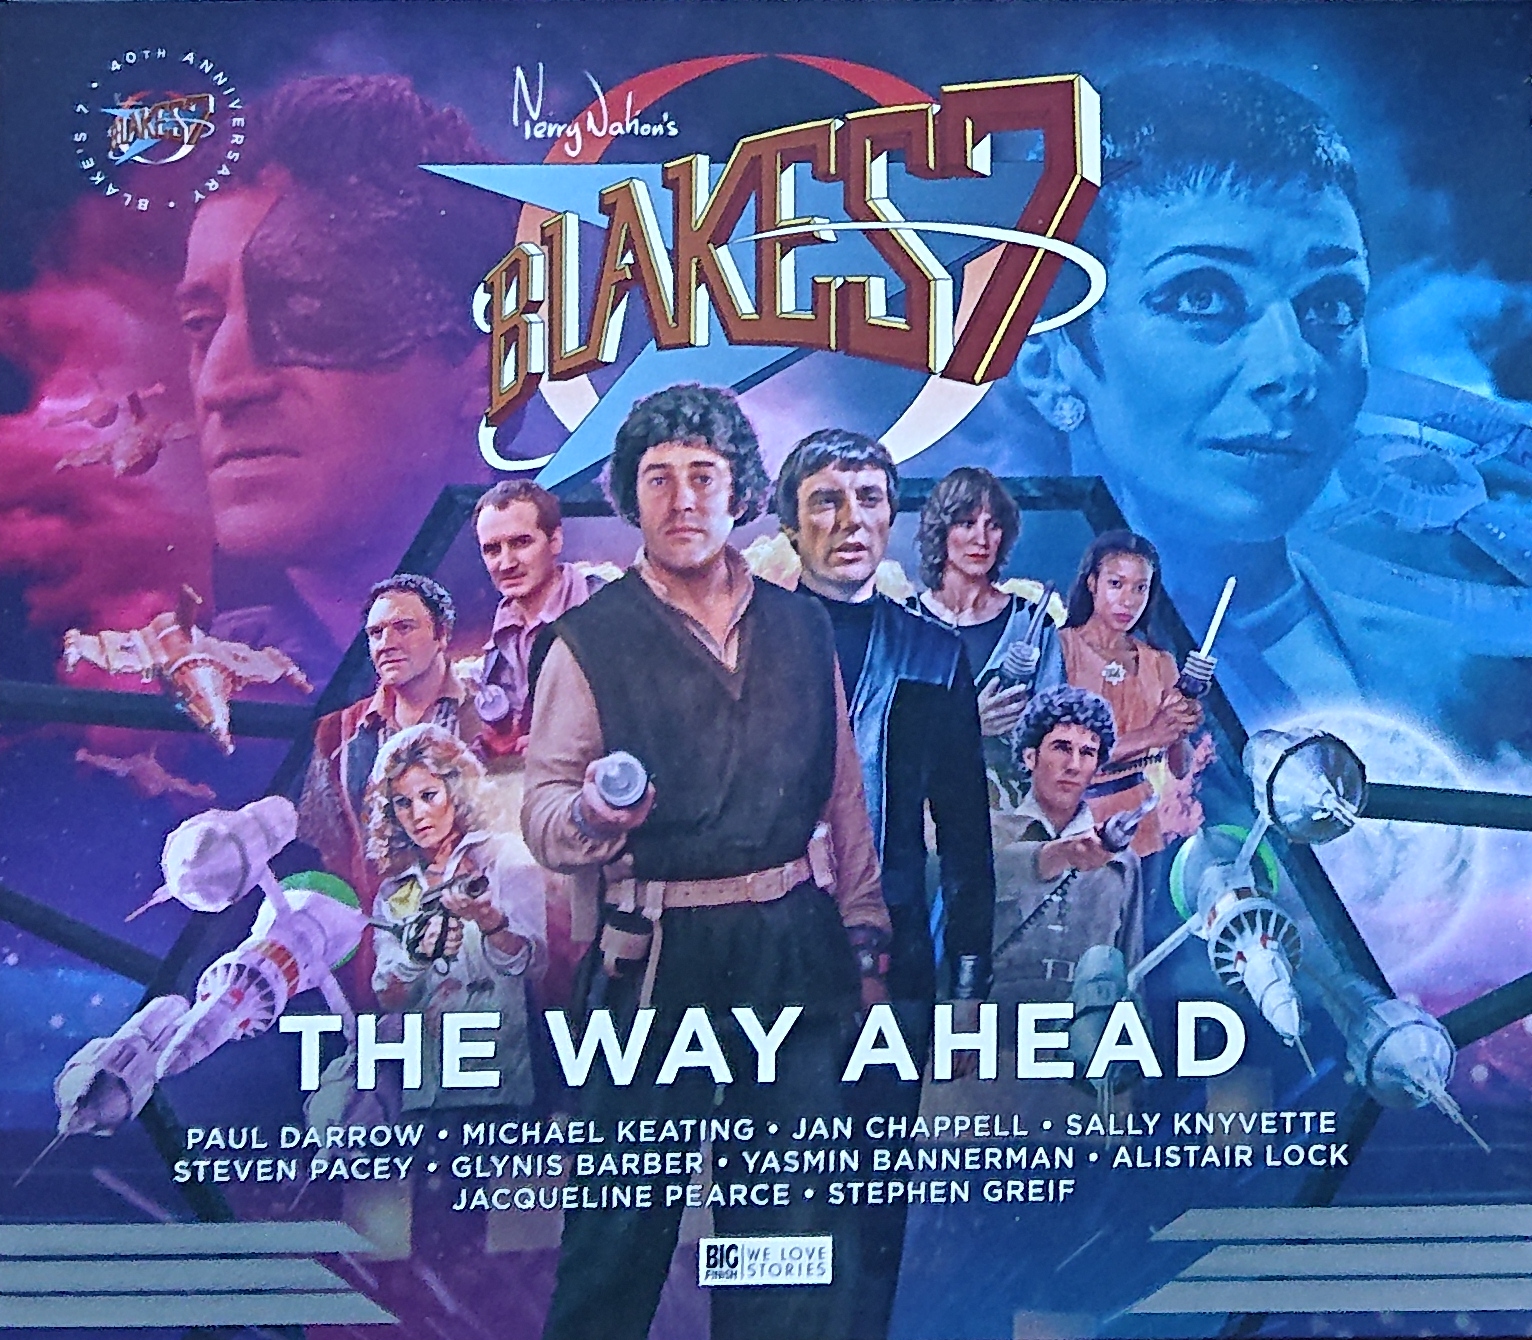 Picture of The way ahead by artist Unknown from the BBC cds - Records and Tapes library